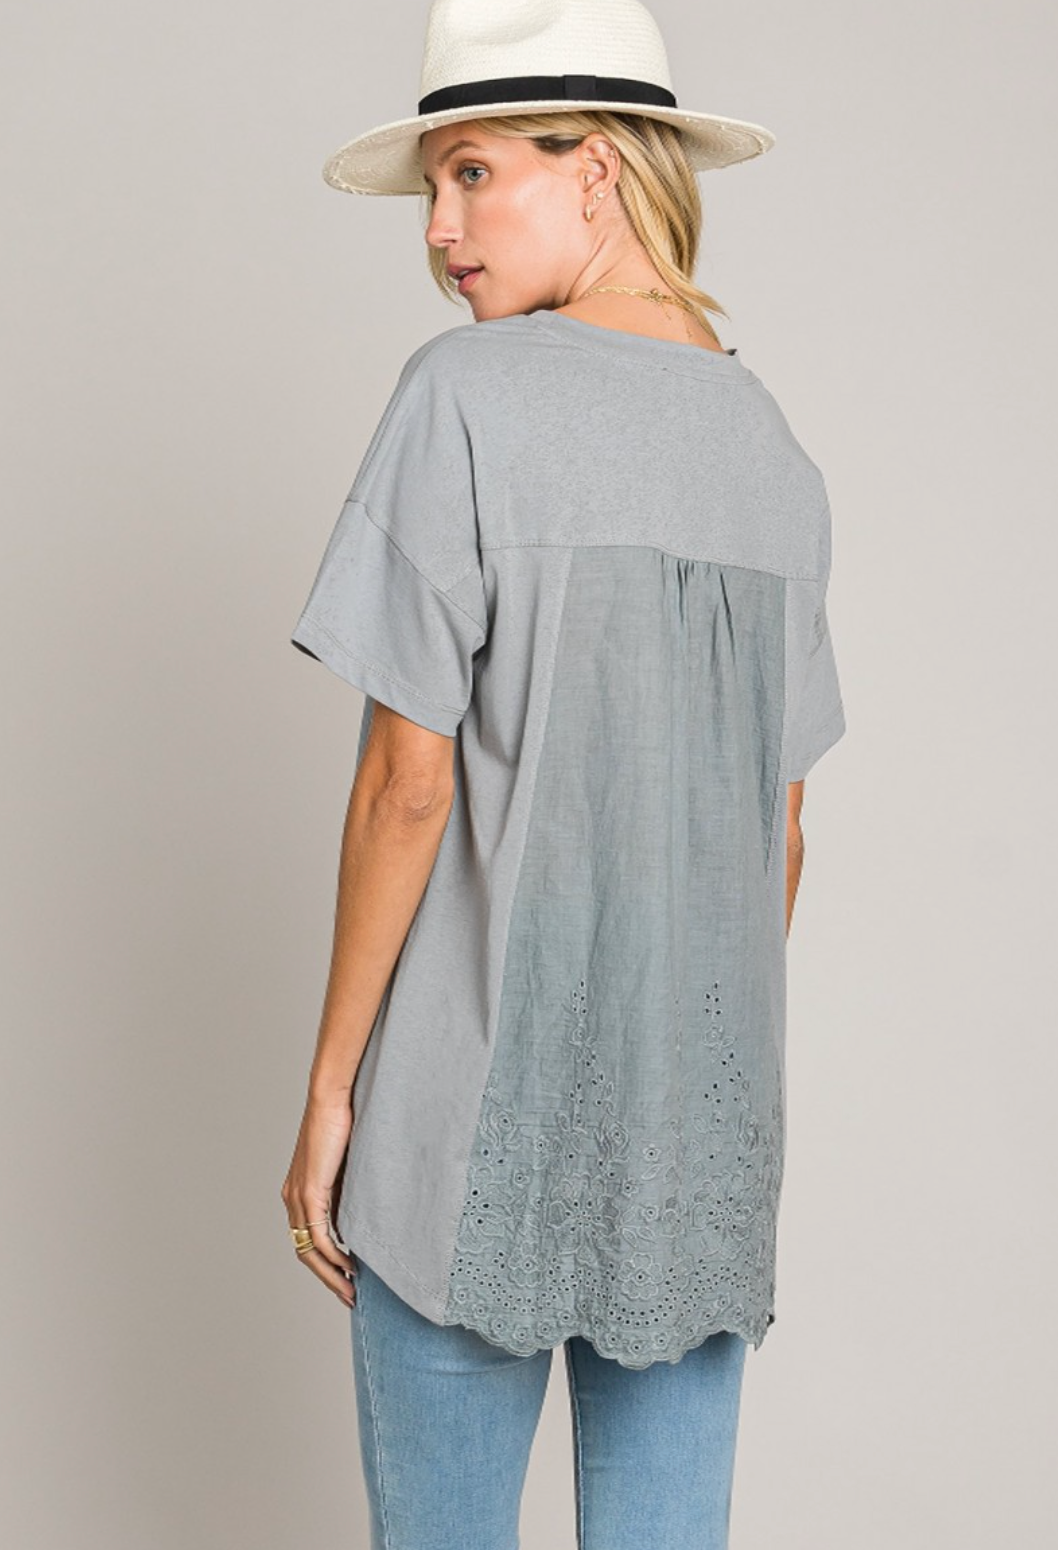 We Can Dance Eyelet Back Top